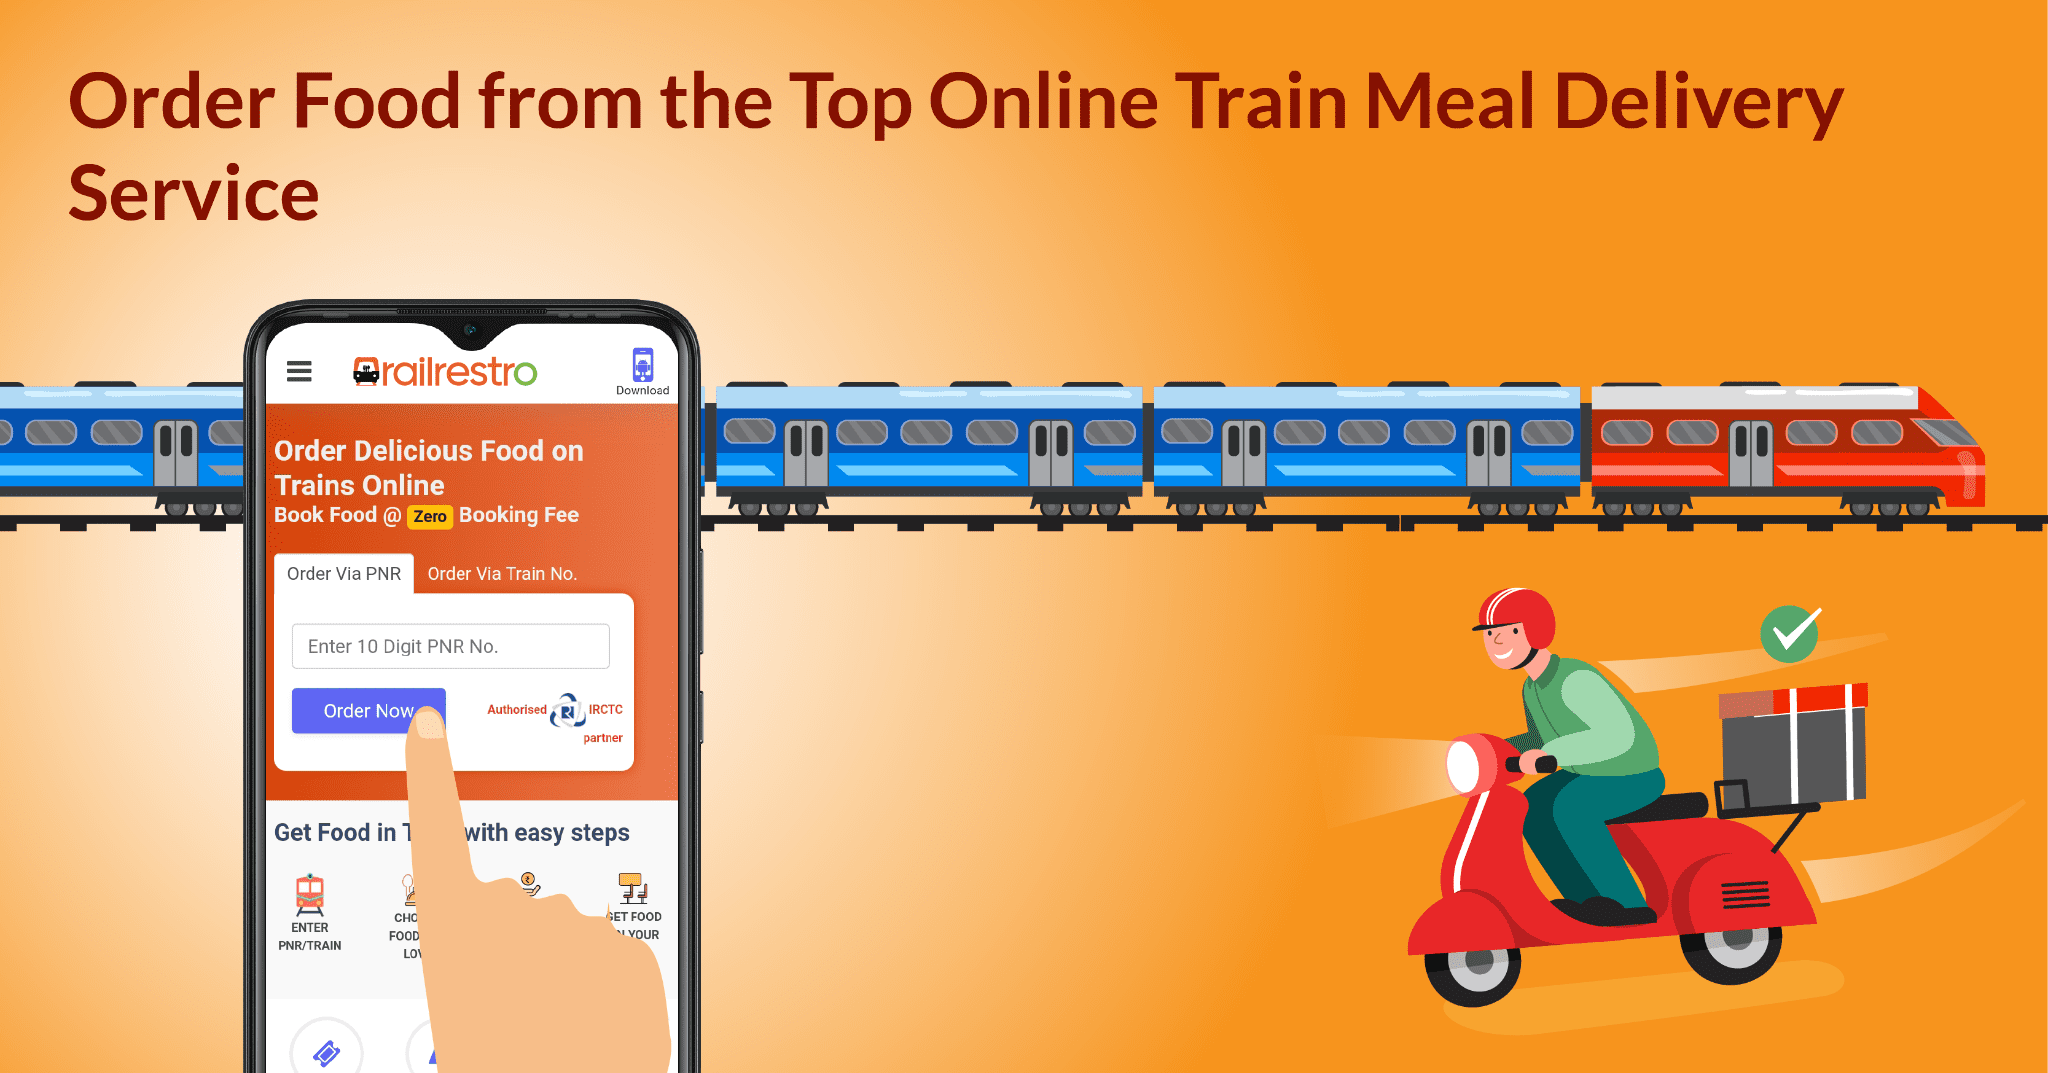 Online Train Meal Delivery